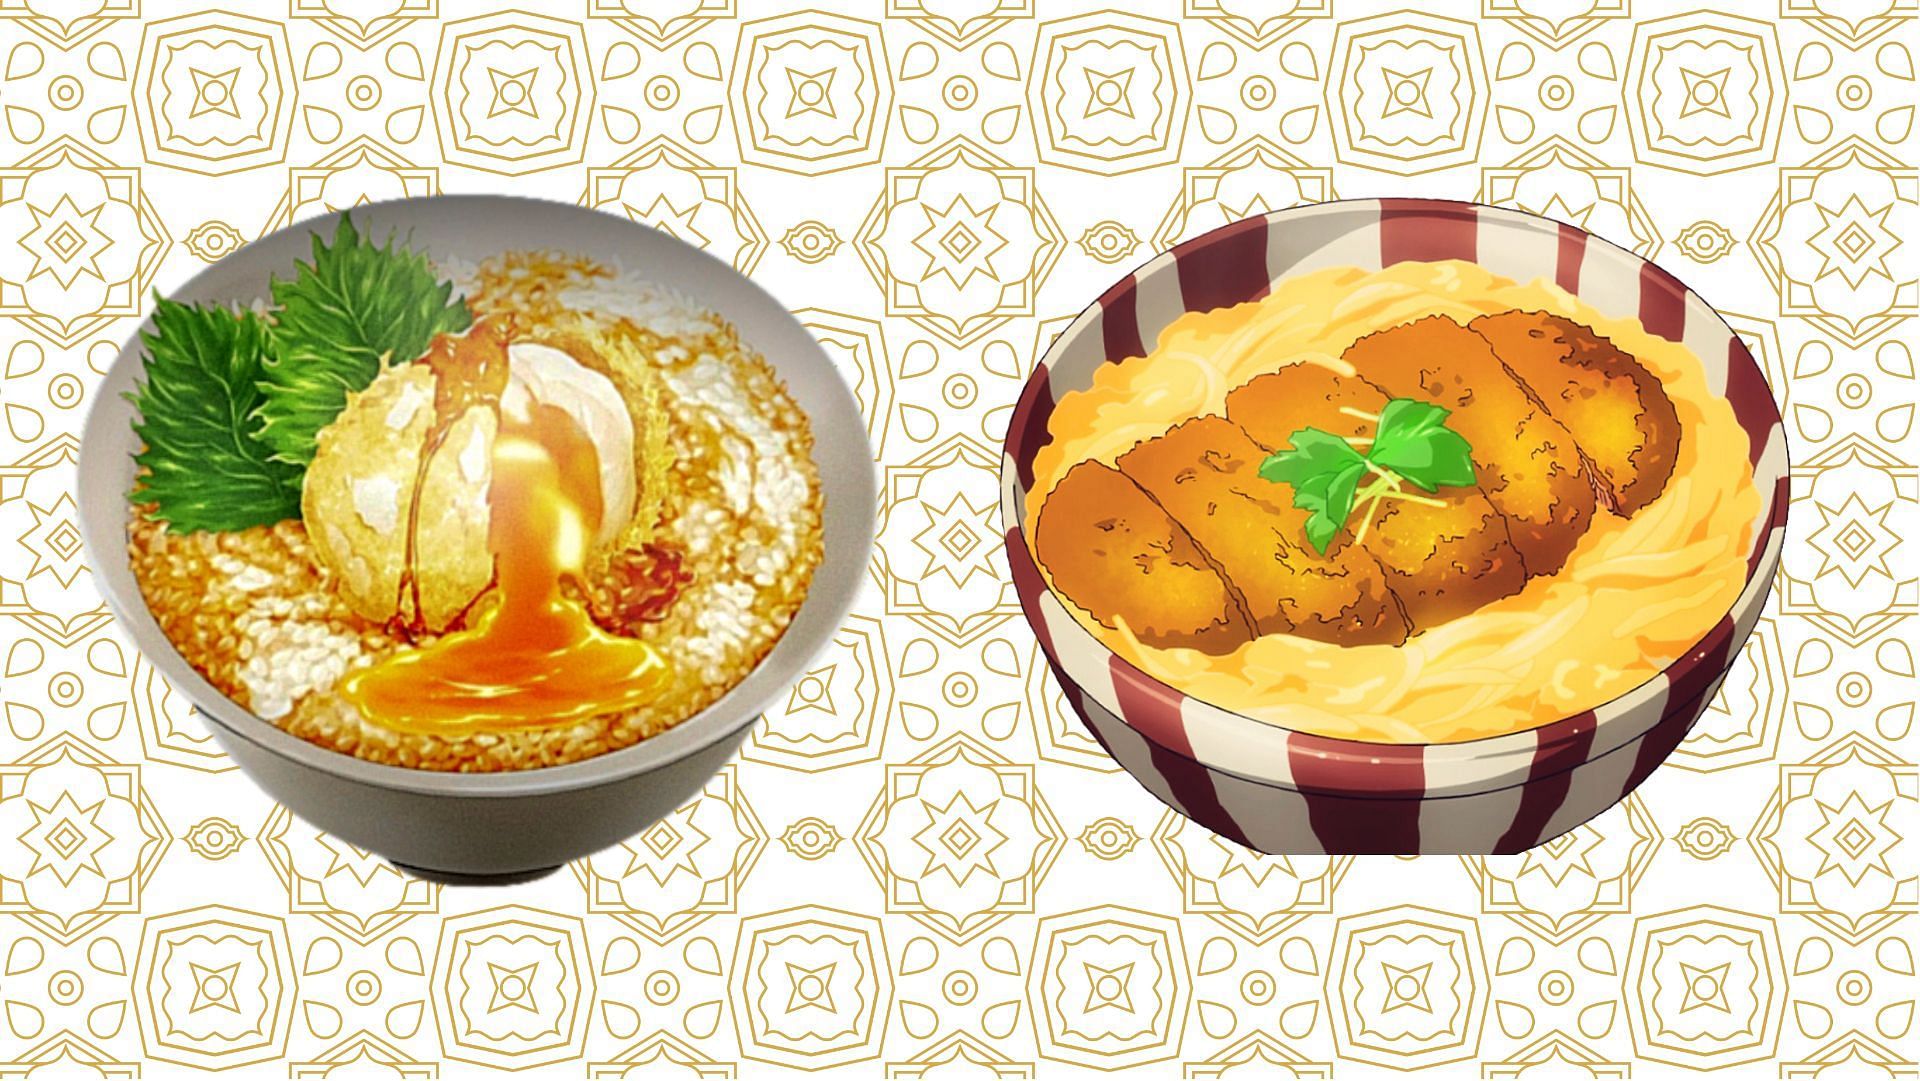 The Wonderful World of Top 20 Japanese Food in Anime